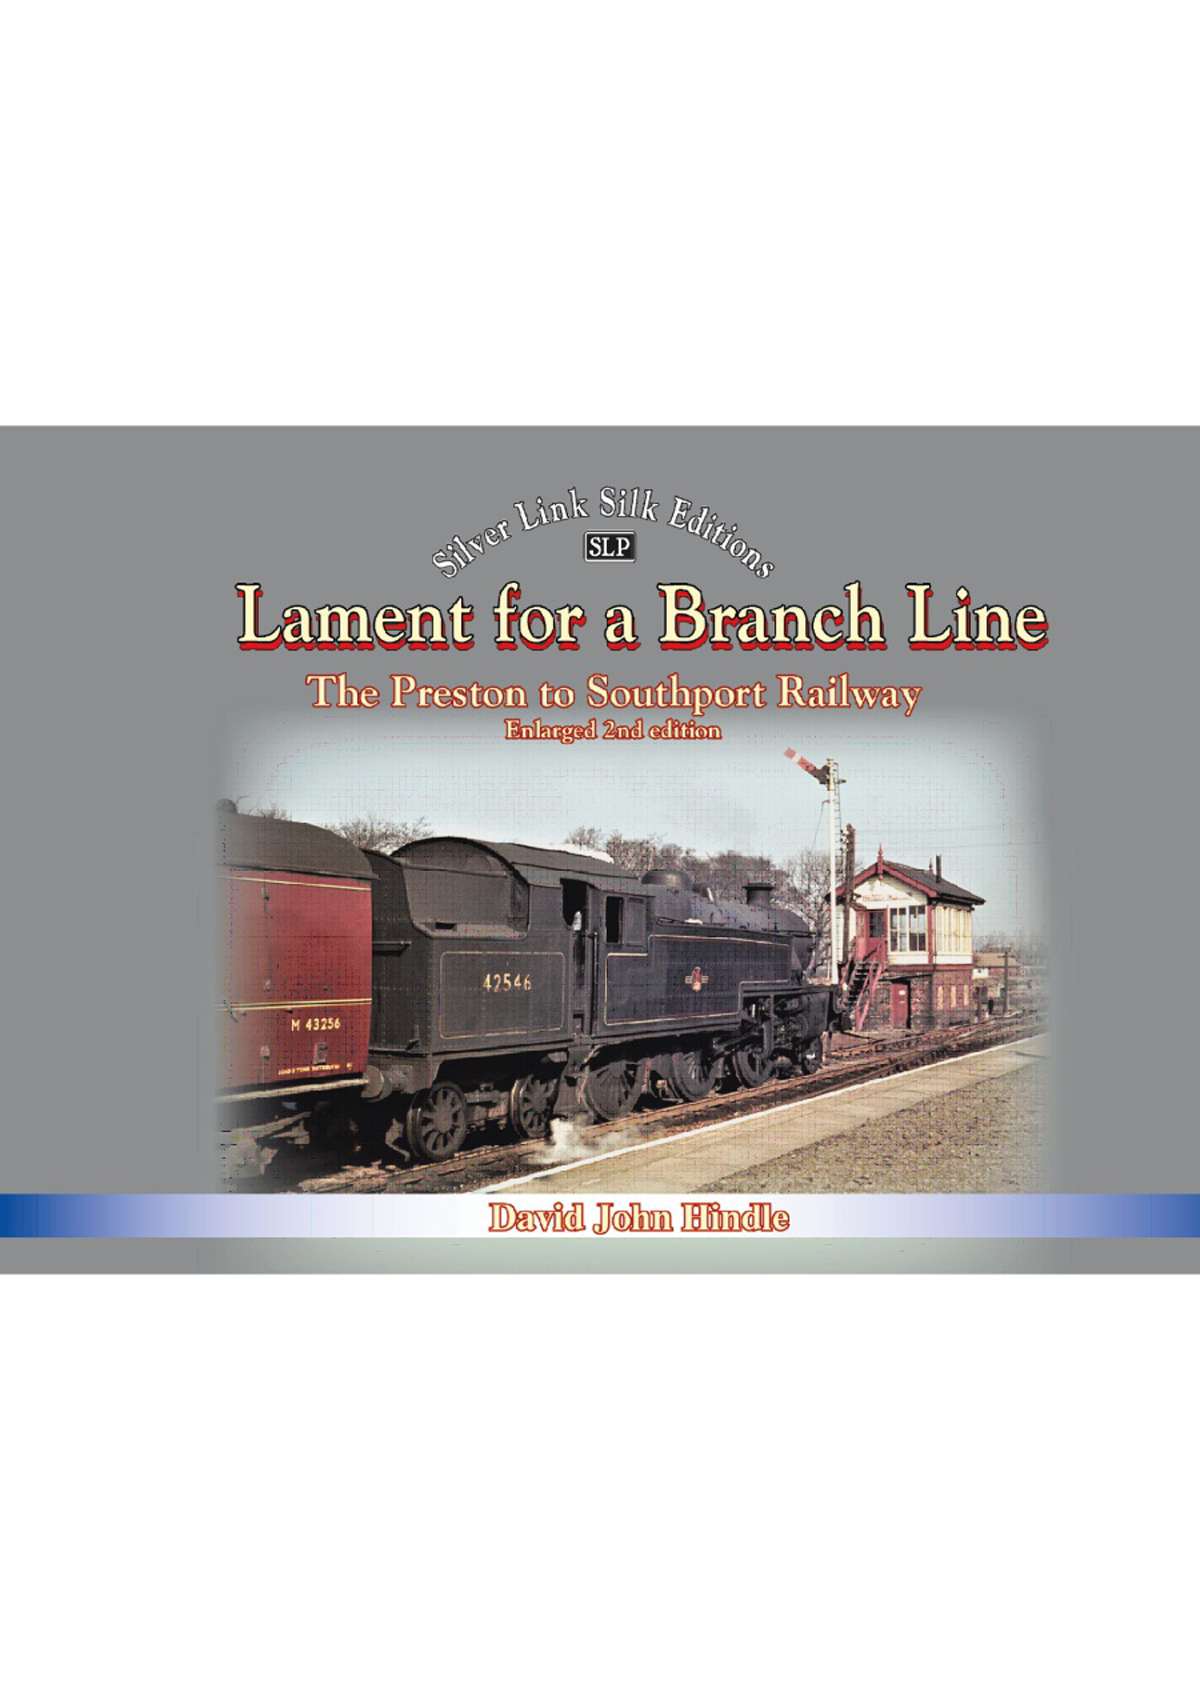 20% OFF RRP is £30.00 LAMENT FOR A BRANCH LINE The Preston to Southport Railway